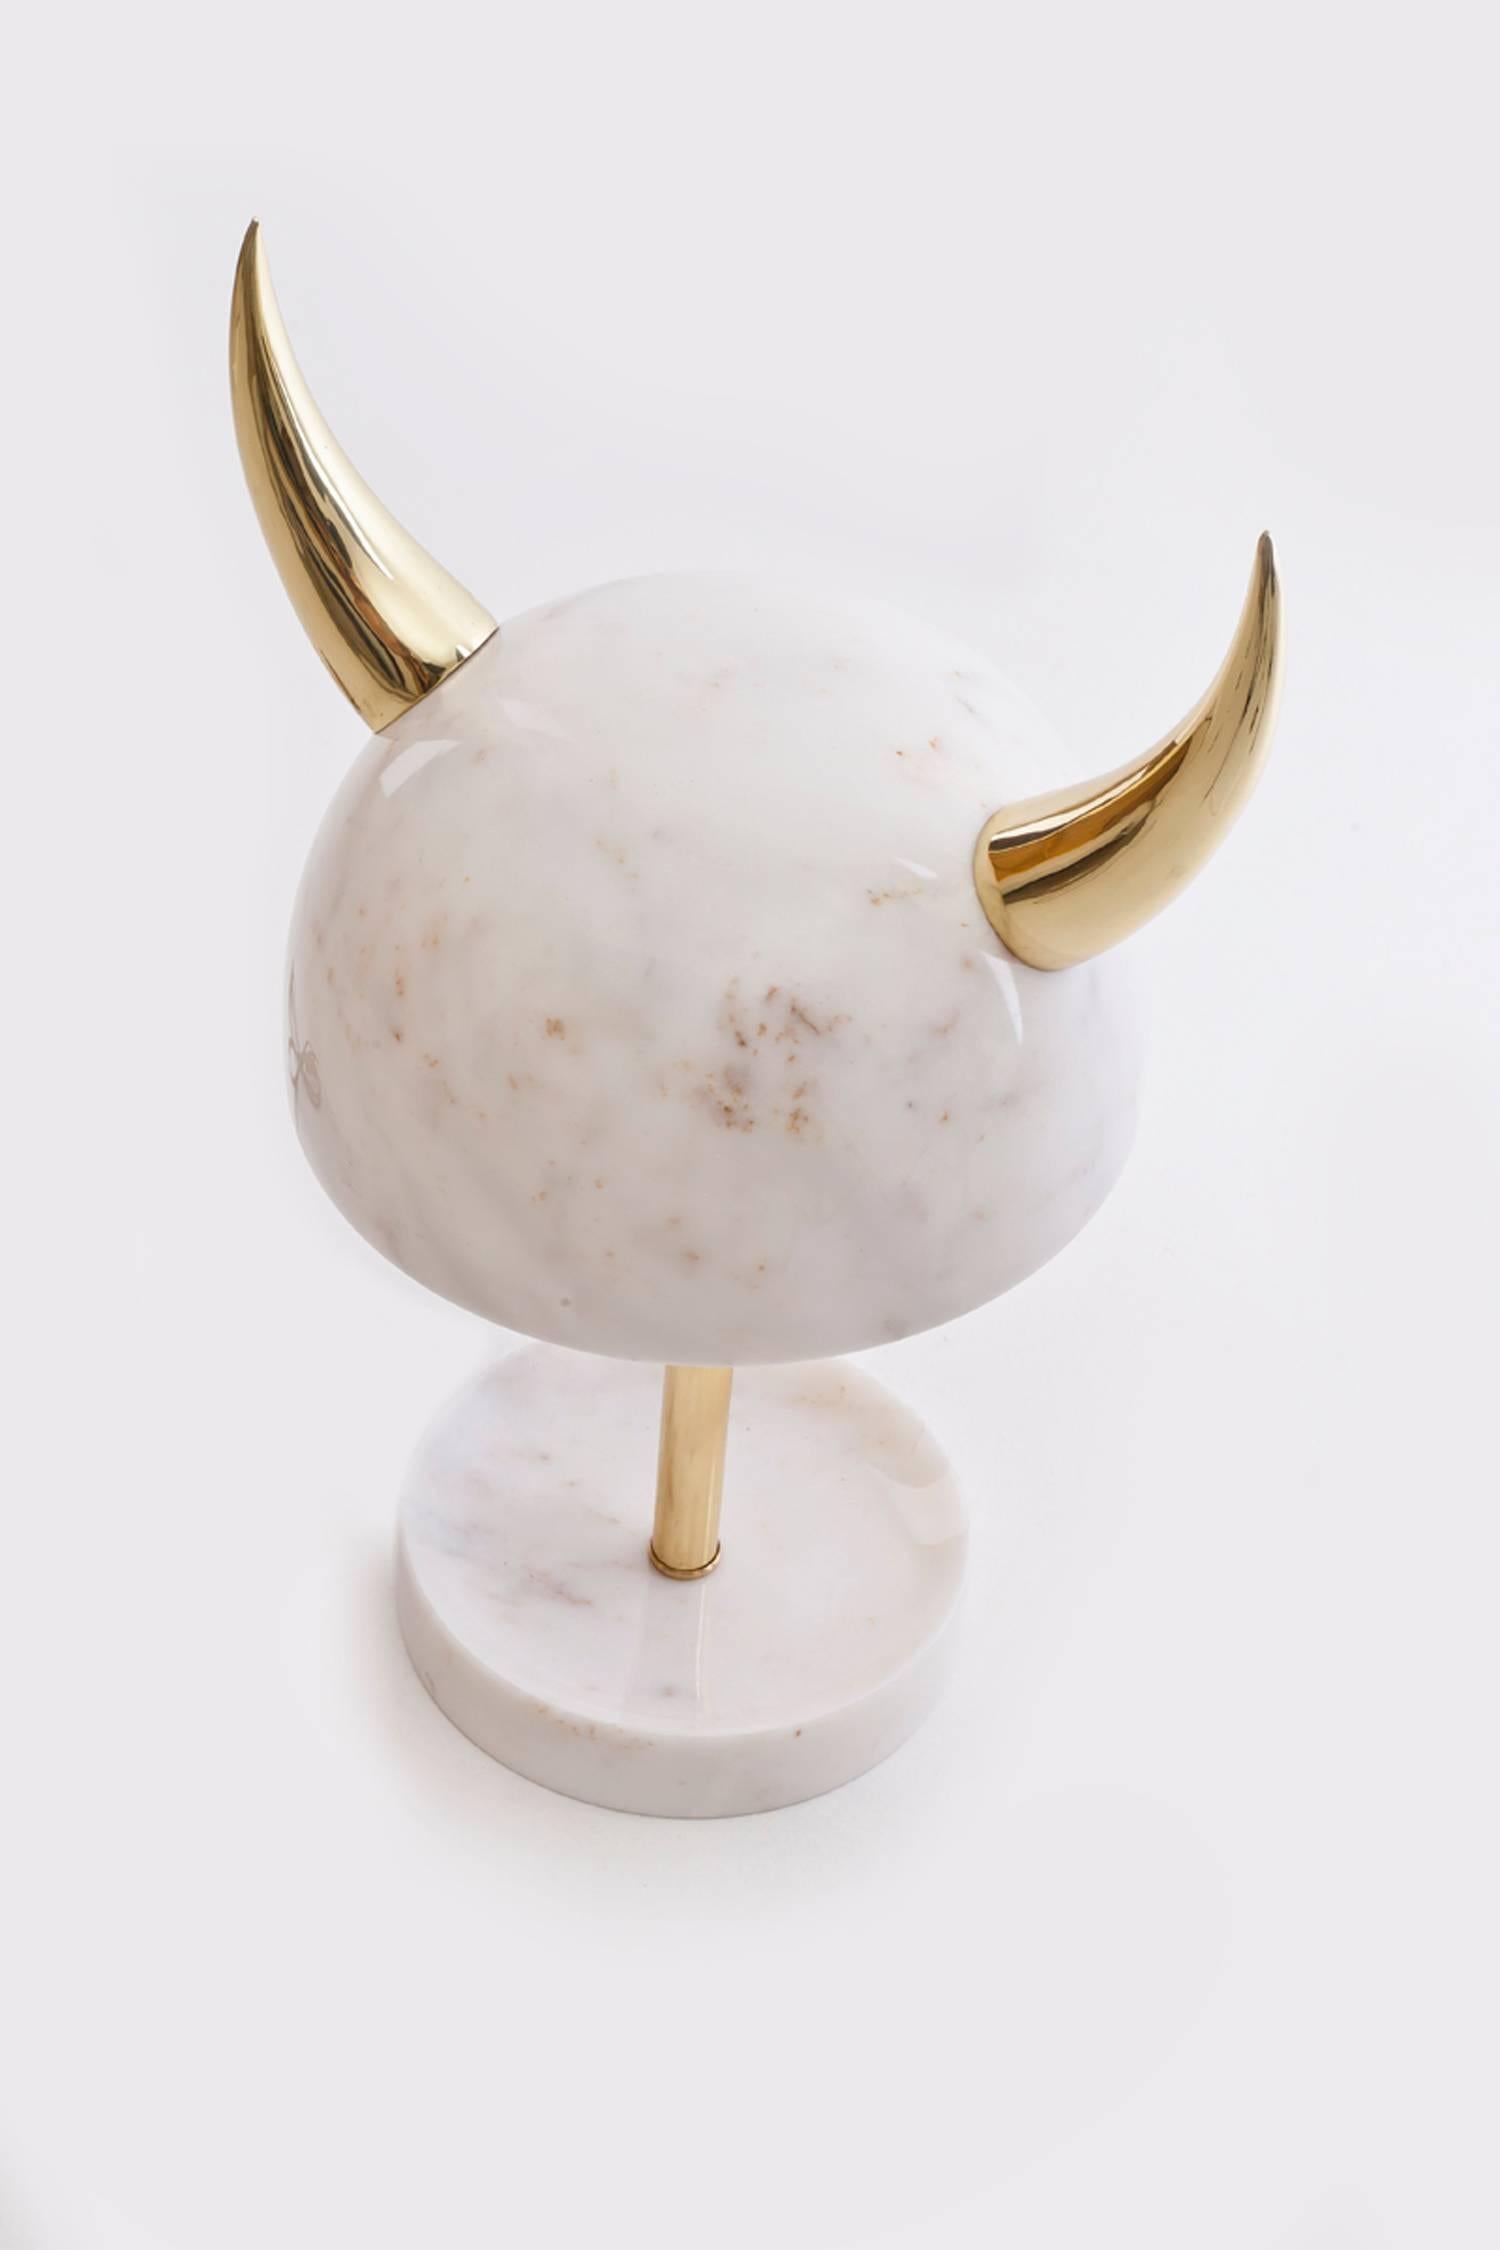 My little Viking table lamp pays homage to old Scandinavian warrior helmets. It echoes the shape and style with a contemporary twist. The metallic armour and bone have been replaced by marble and polished brass, giving this barbaric symbol an